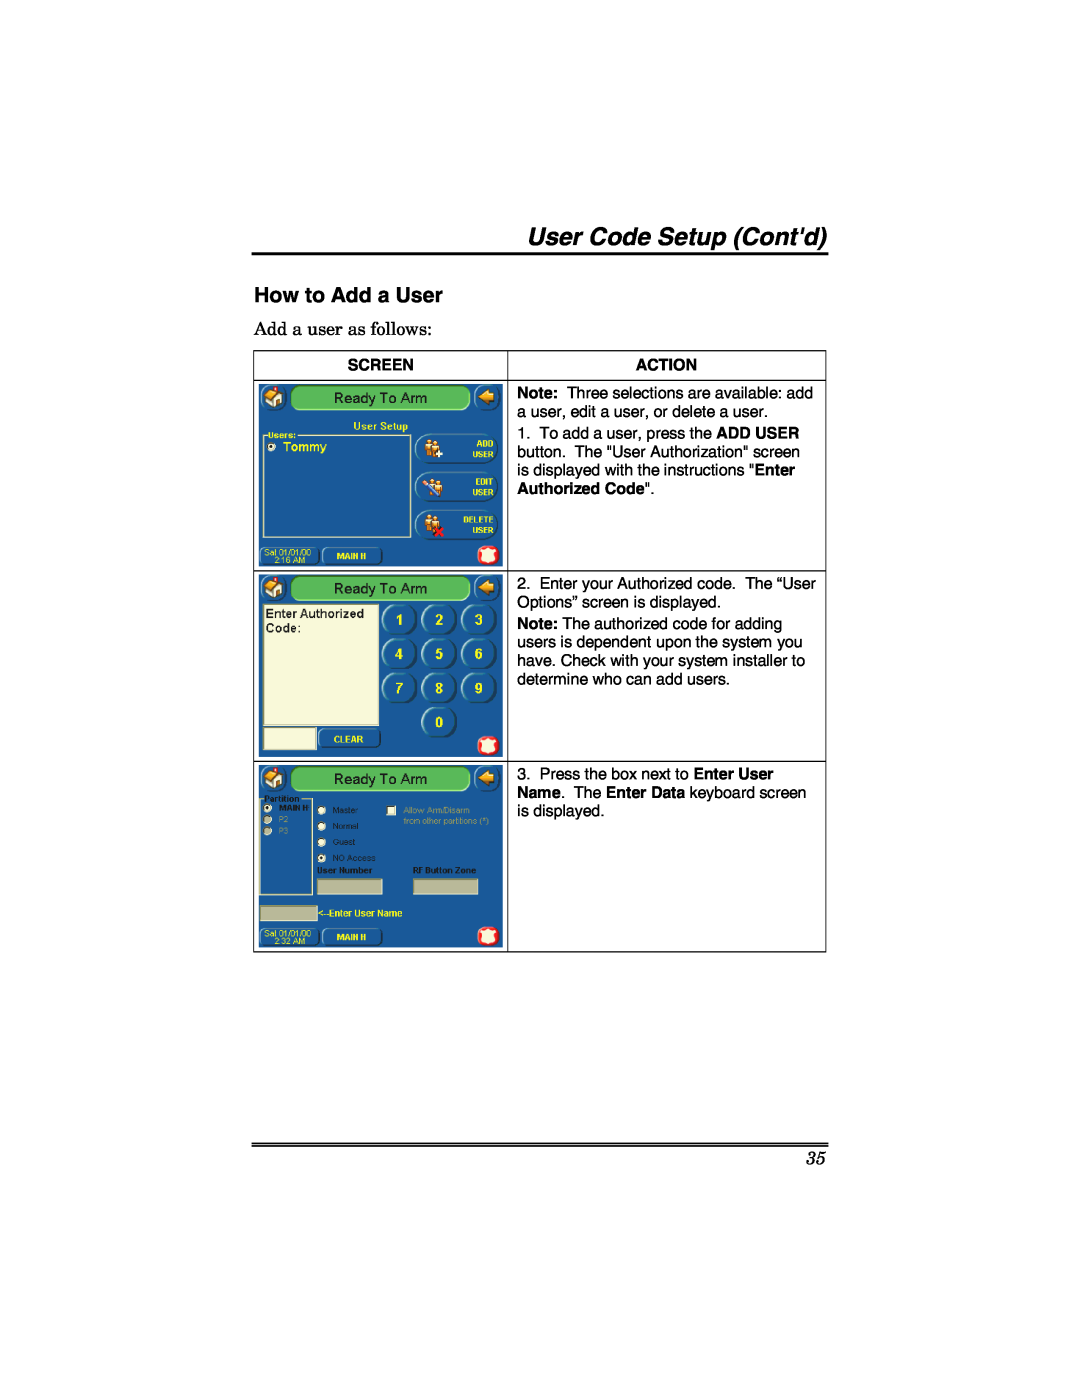 Honeywell 6271 manual User Code Setup Contd, How to Add a User, Screen, Action, Authorized Code 